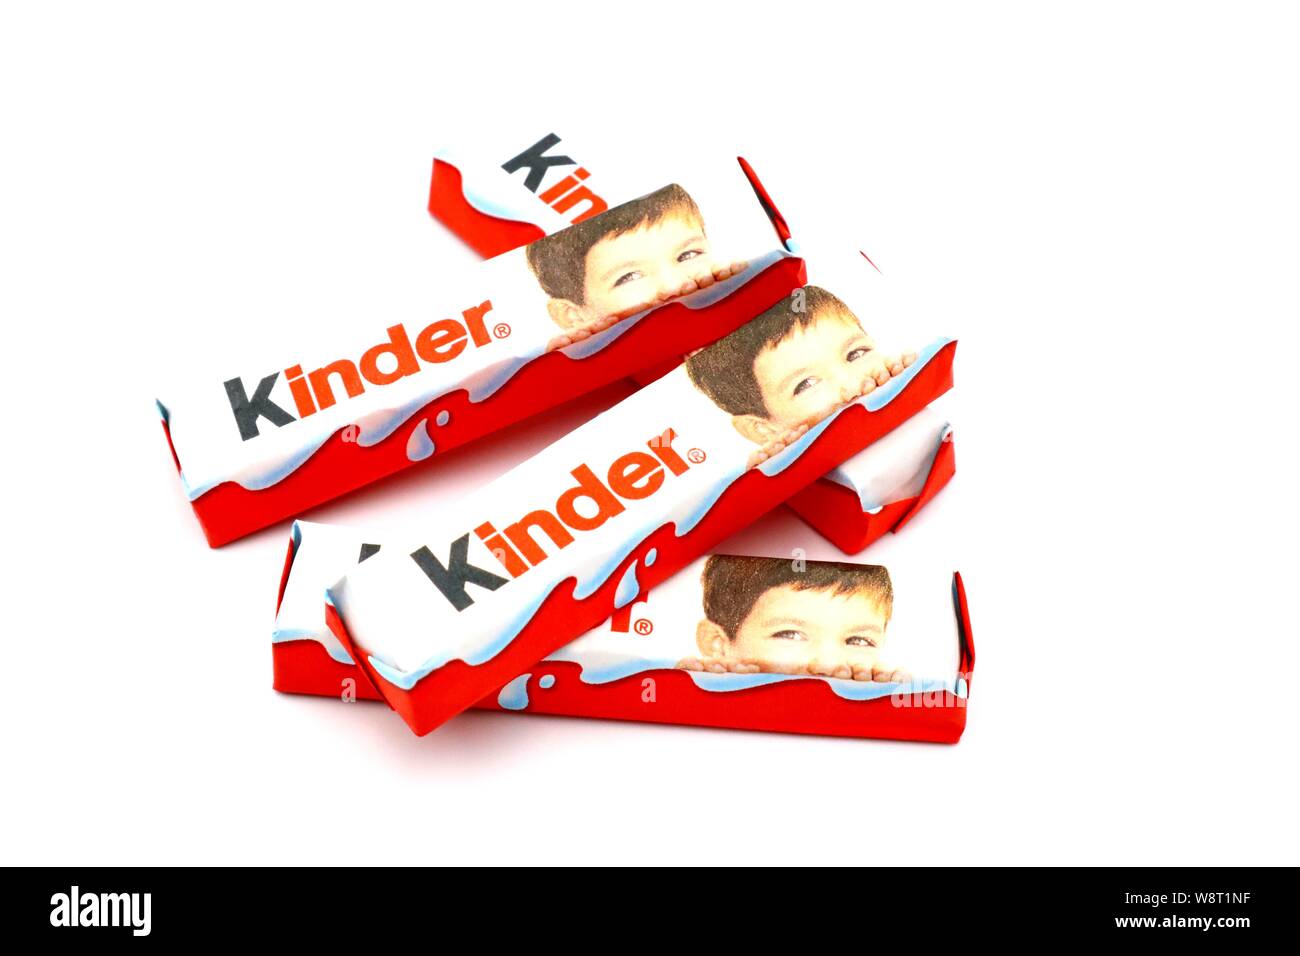 Kinder bueno white background Cut Out Stock Images & Pictures - Alamy